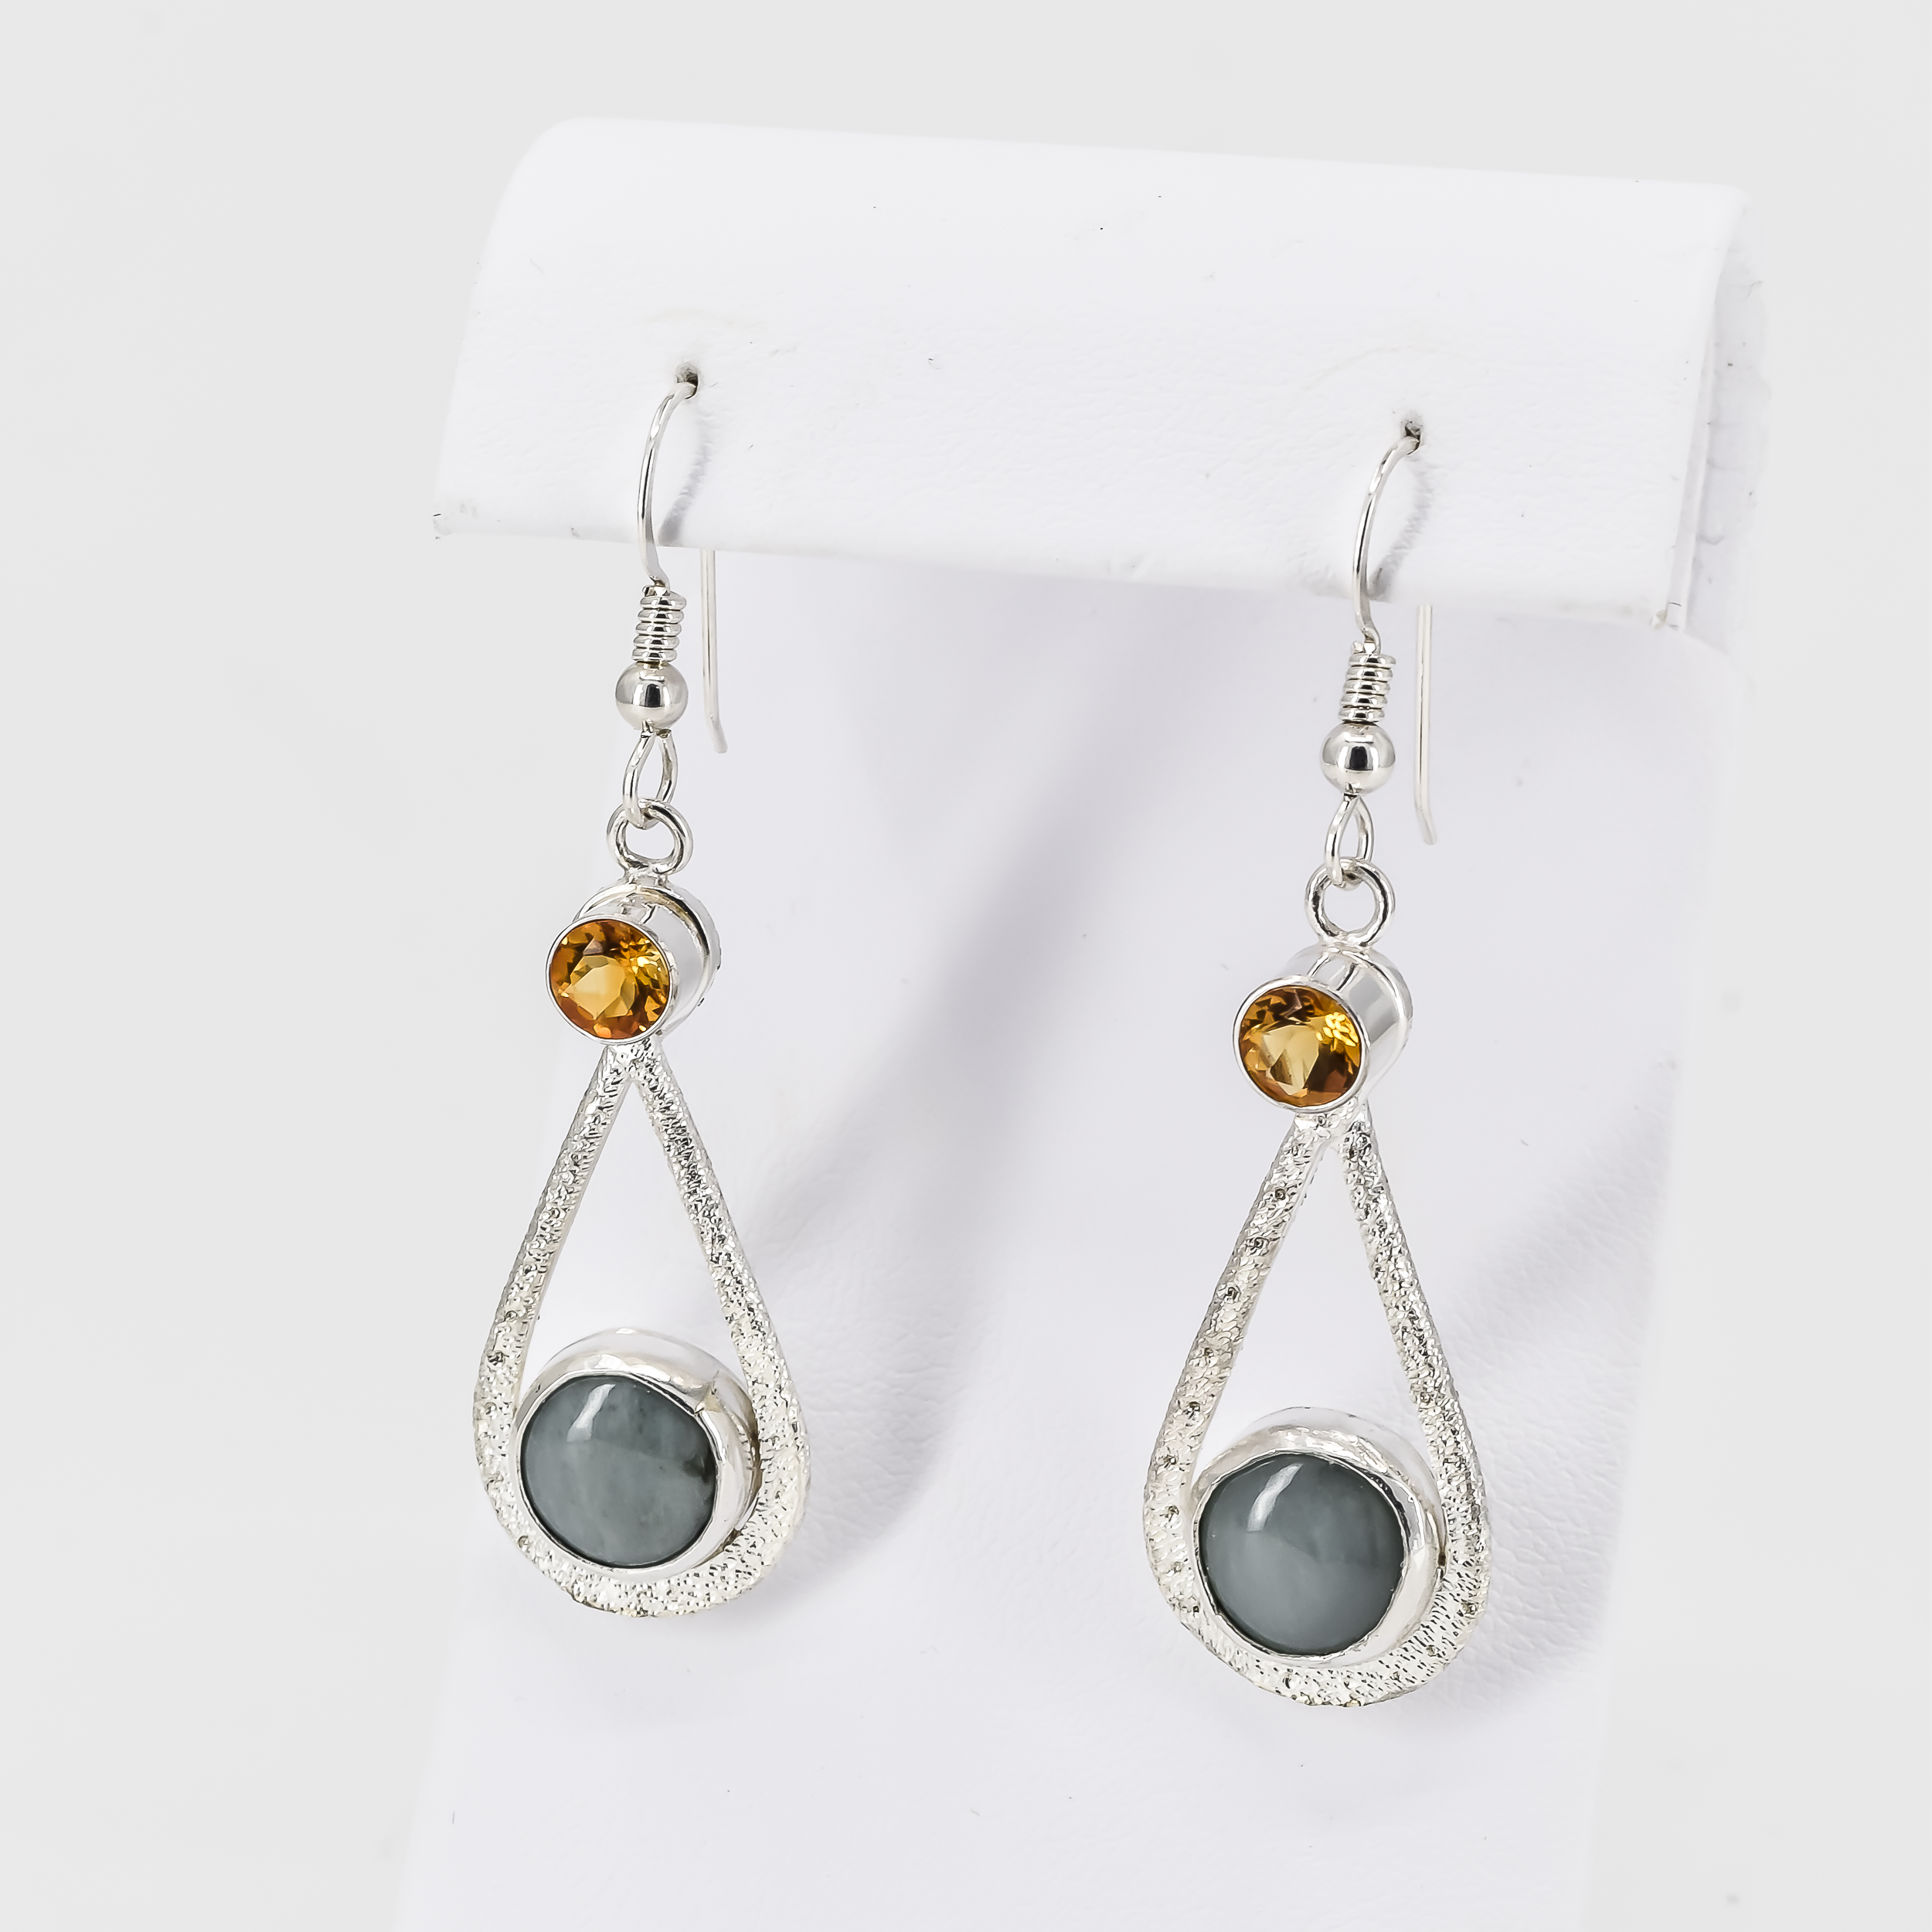 tear drop shaped sterling silver dangle earrings, featuring round faceted golden citrine stones on top and round pastel green jade stones on the bottom. The earrings have a stardust texture all the way through.